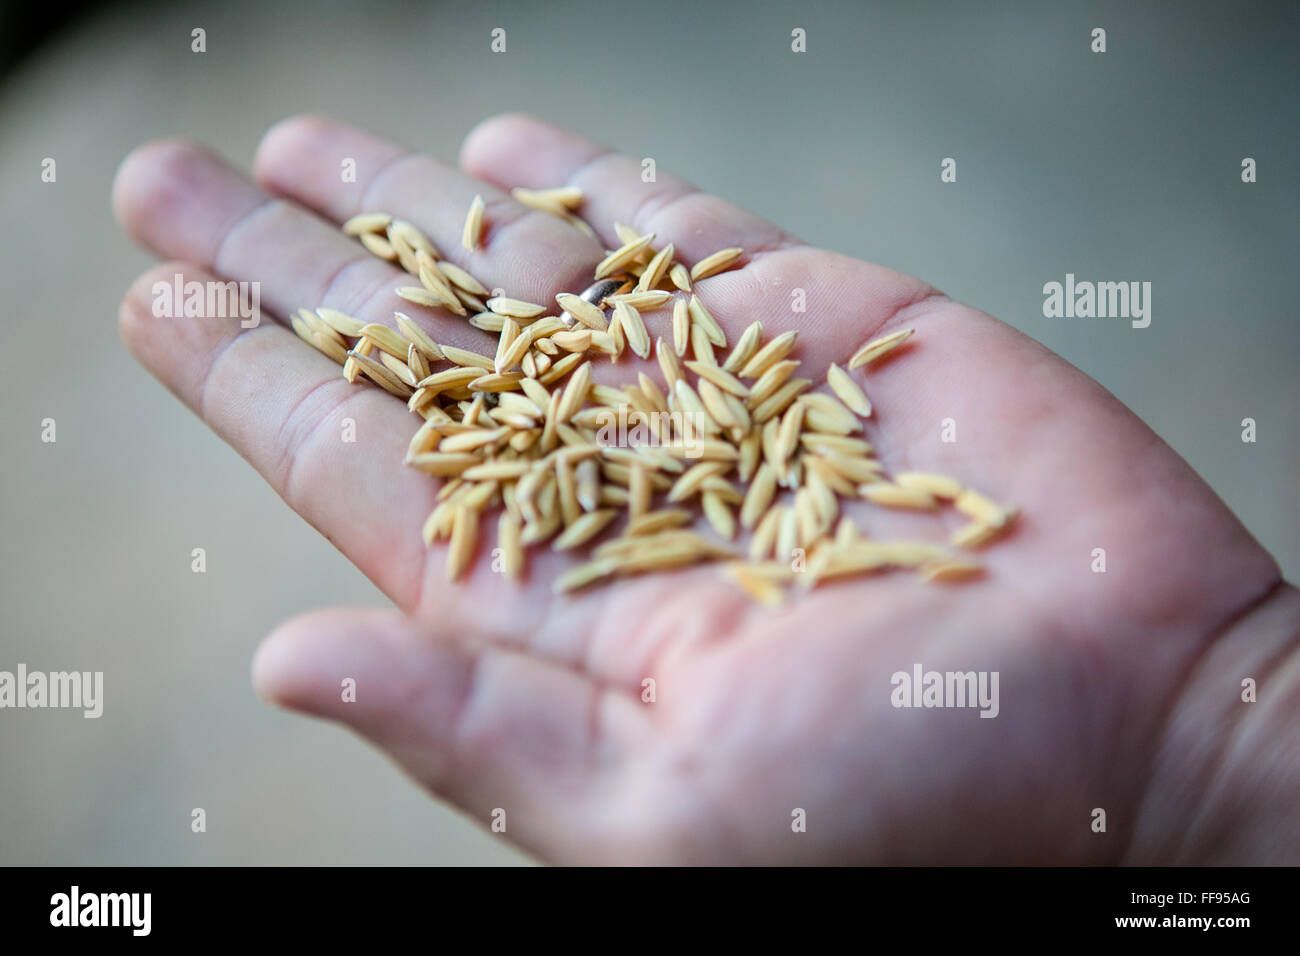 Hand holding rice grains, rice gain on palm Stock Photo